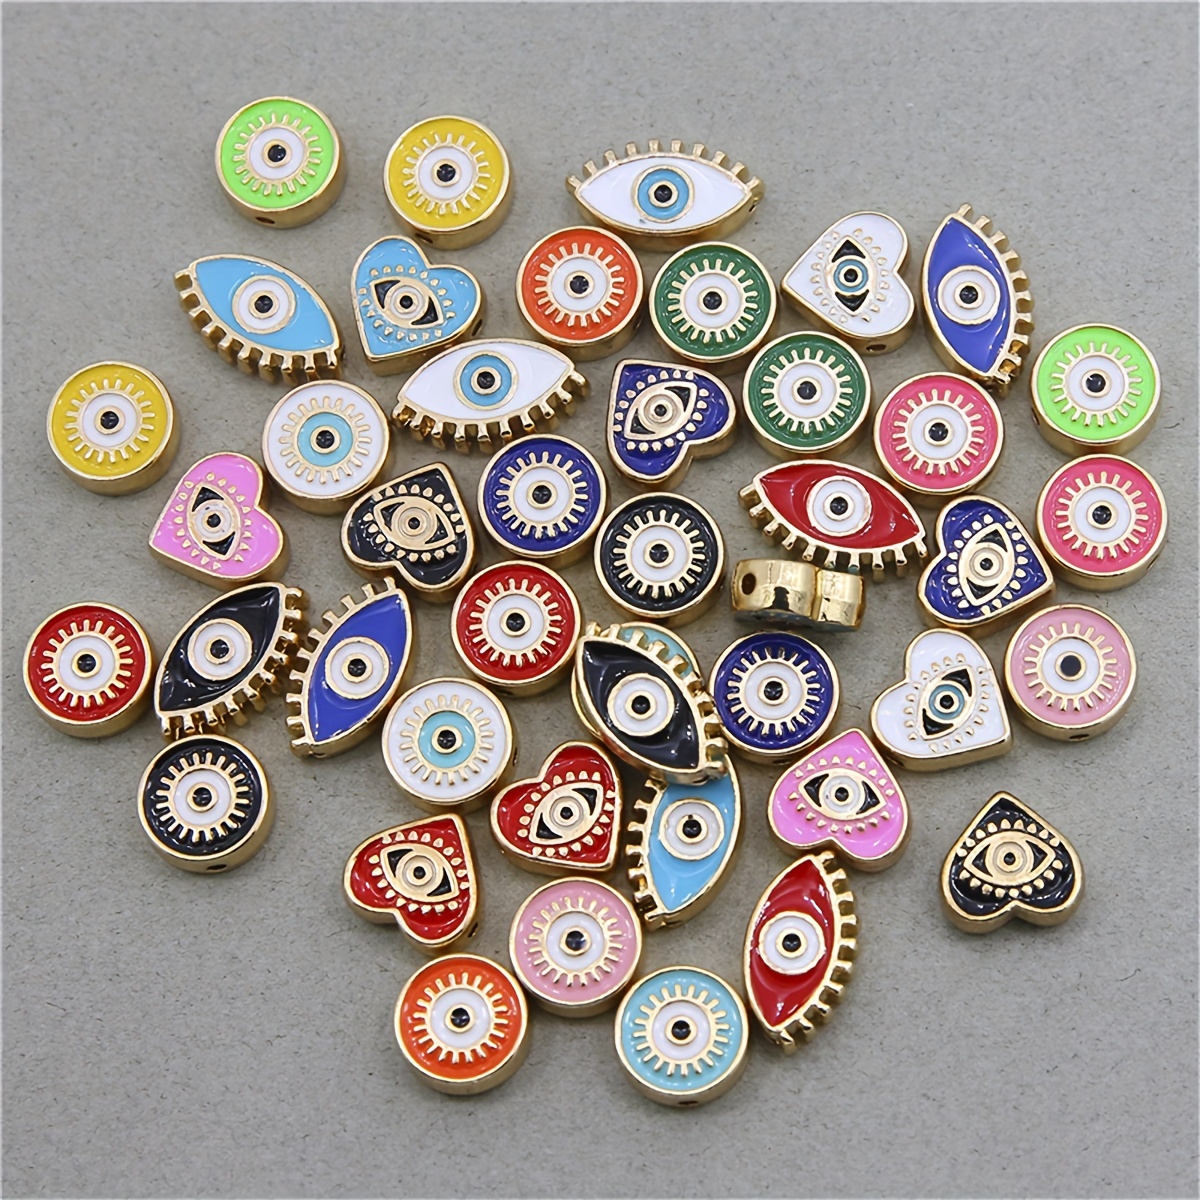 450 Pieces Evil Eye Beads DIY Crafts Evil Eye Charms with Storage Box for  DIY Jewelry Bracelet Earring Necklace Craft Making, 15 